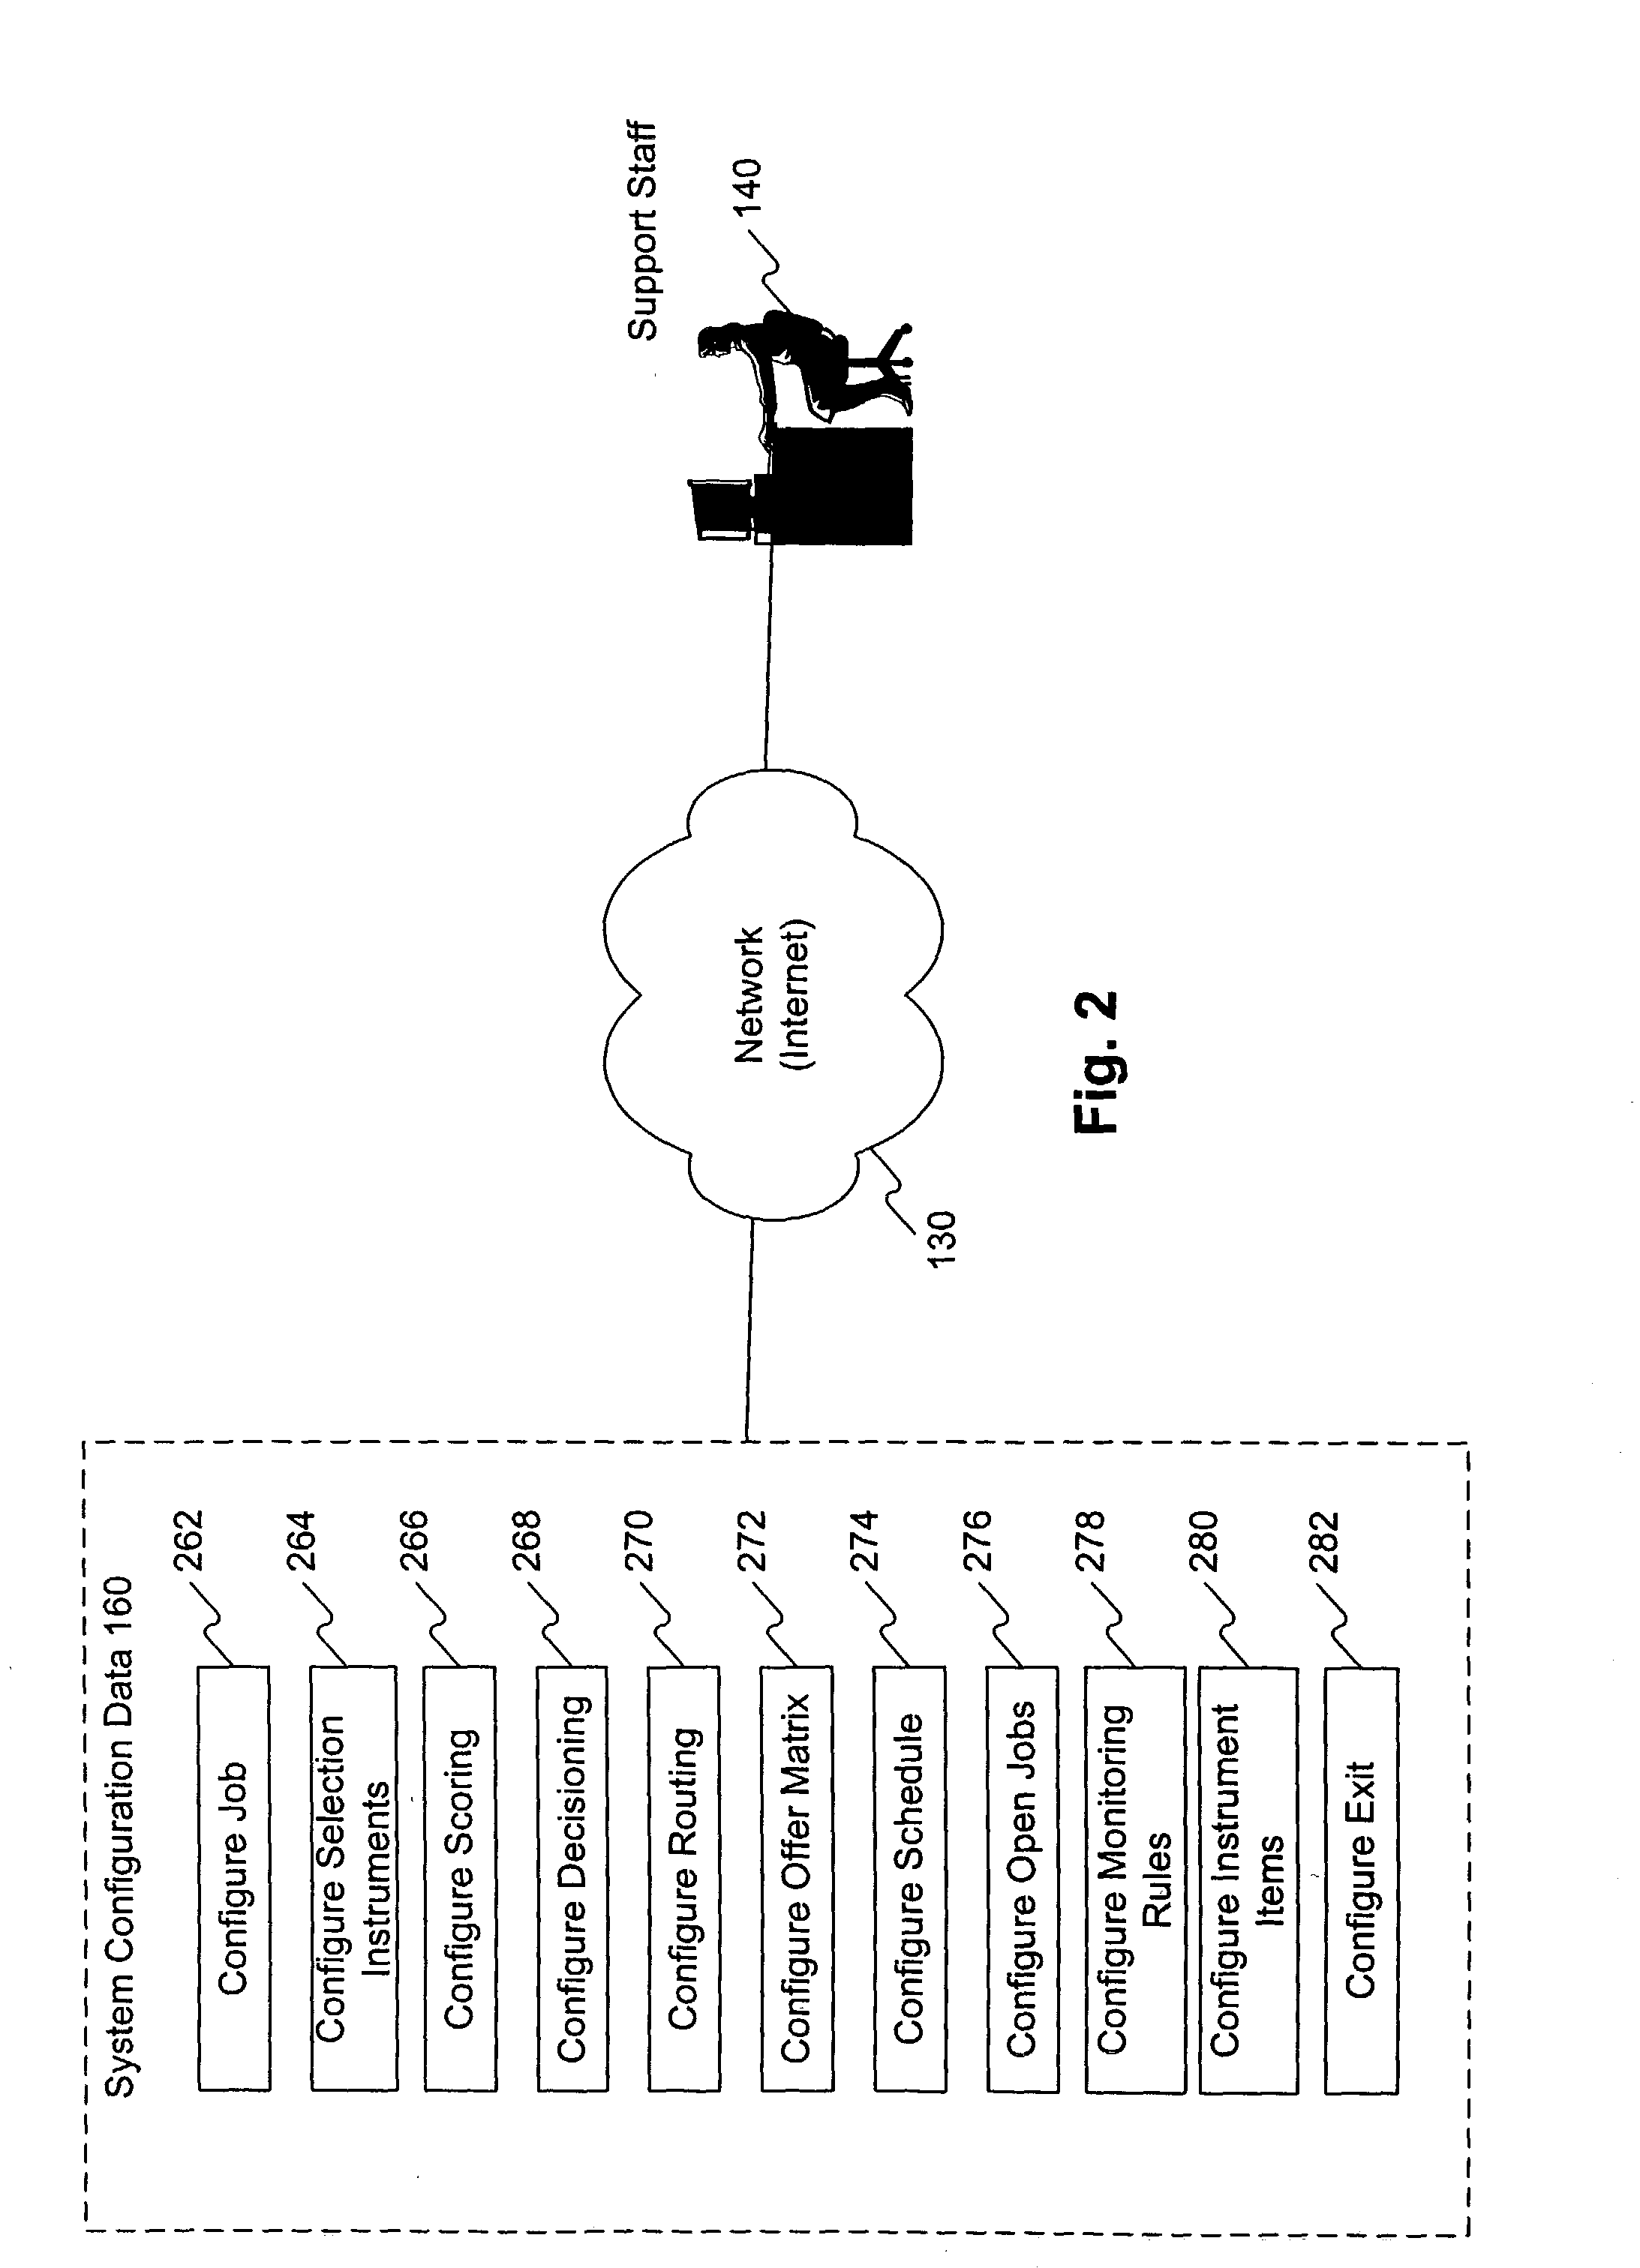 Systems and methods for network-based employment decisioning